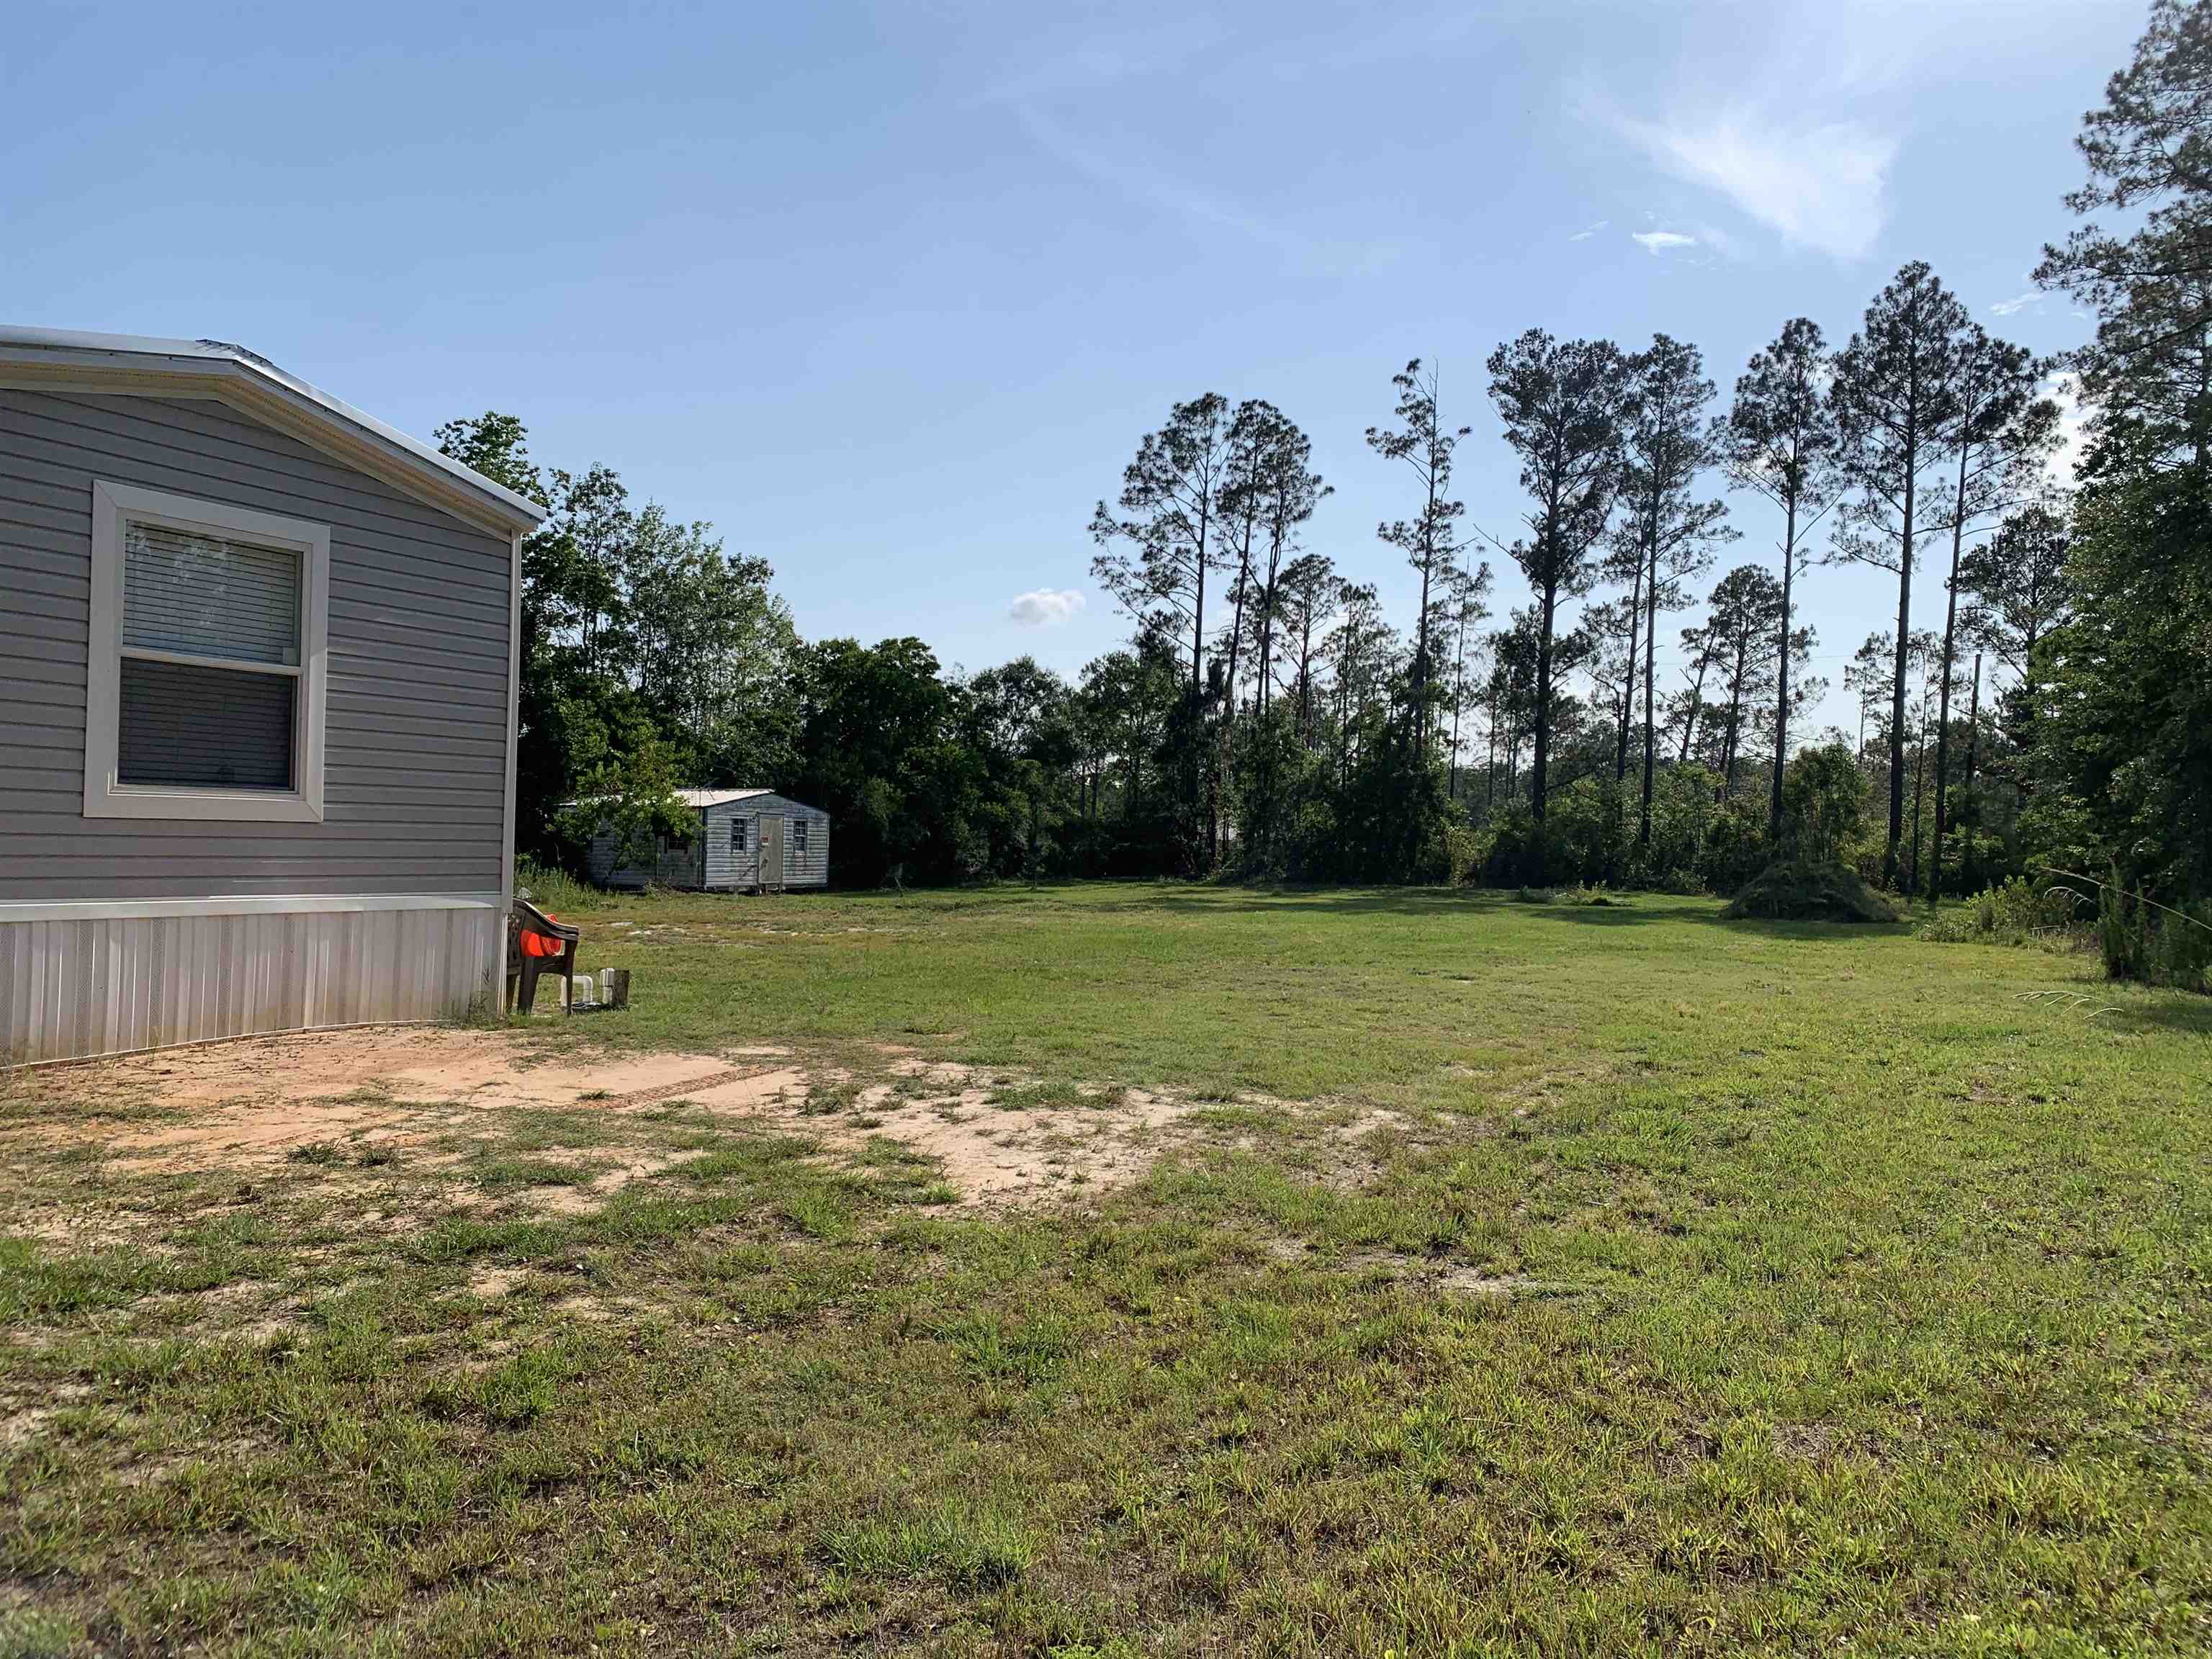 291 James Pitts Drive,WEWAHITCHKA,Florida 32465,3 Bedrooms Bedrooms,2 BathroomsBathrooms,Manuf/mobile home,291 James Pitts Drive,365742